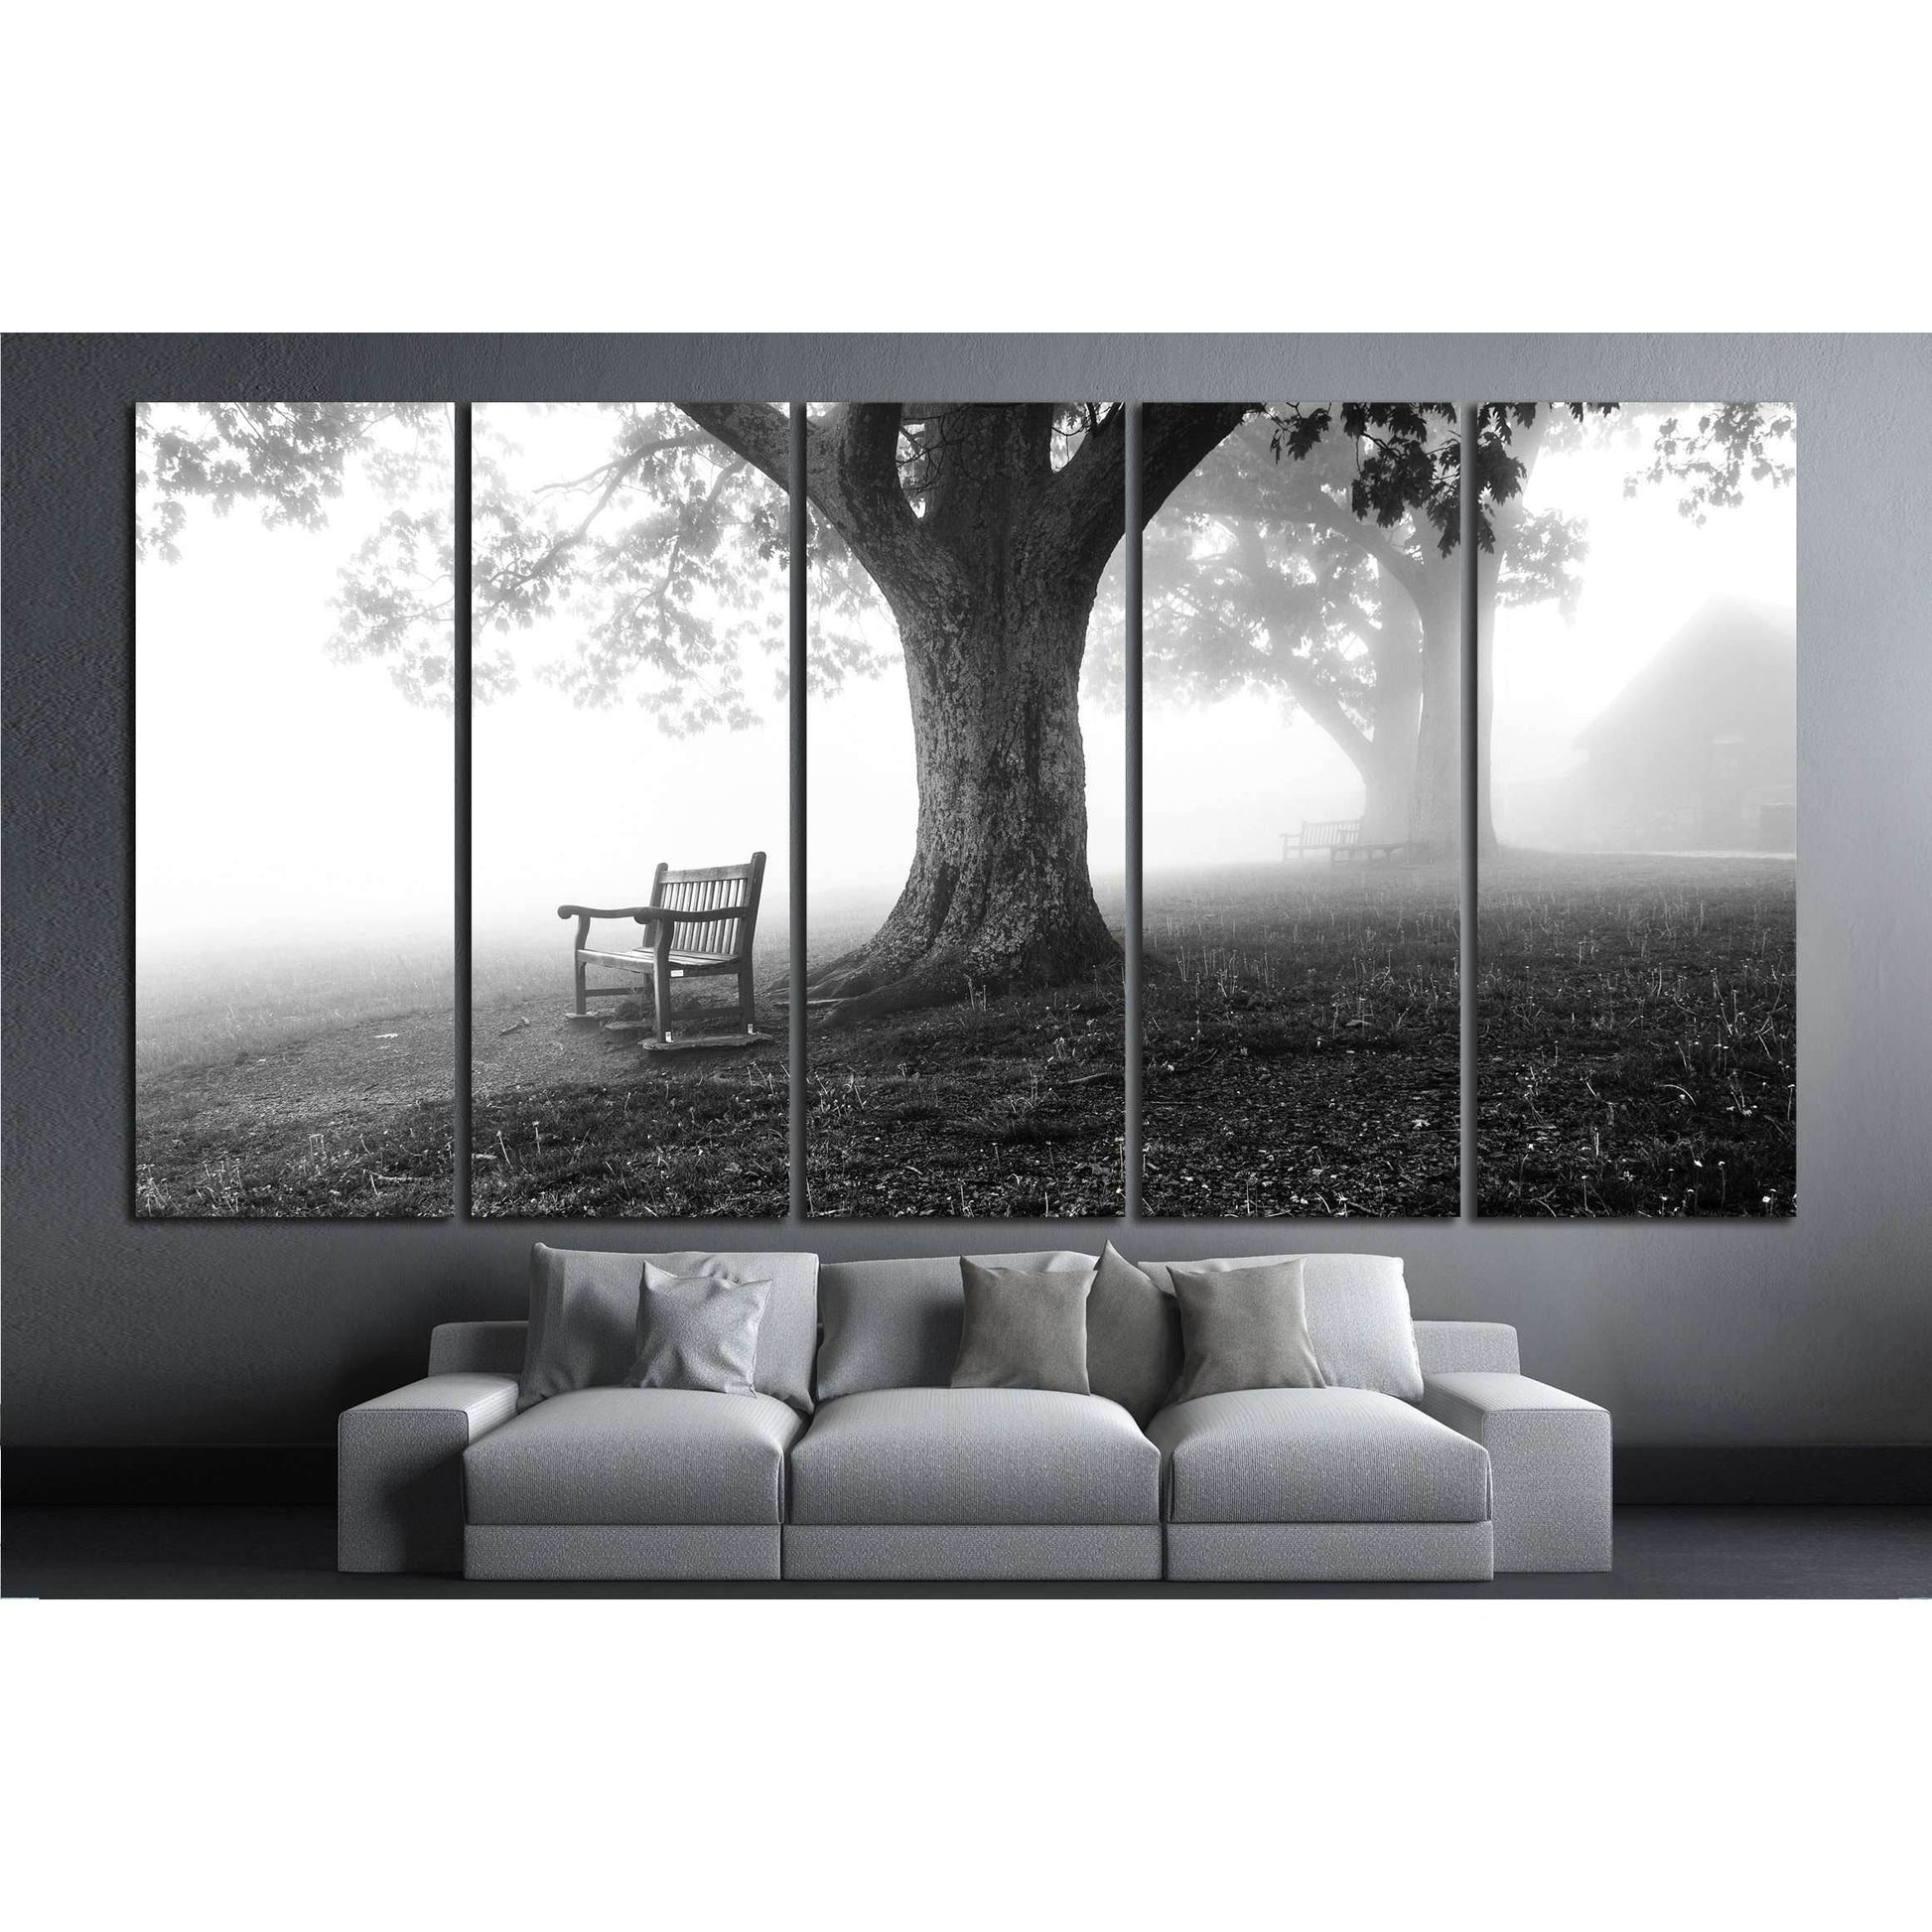 Shenandoah Park Misty Morning Canvas Print - B&W Nature Wall ArtThis canvas print captures a serene monochromatic scene from Shenandoah National Park, depicting a solitary bench under a large tree, enveloped in mist. The image conveys a sense of peaceful